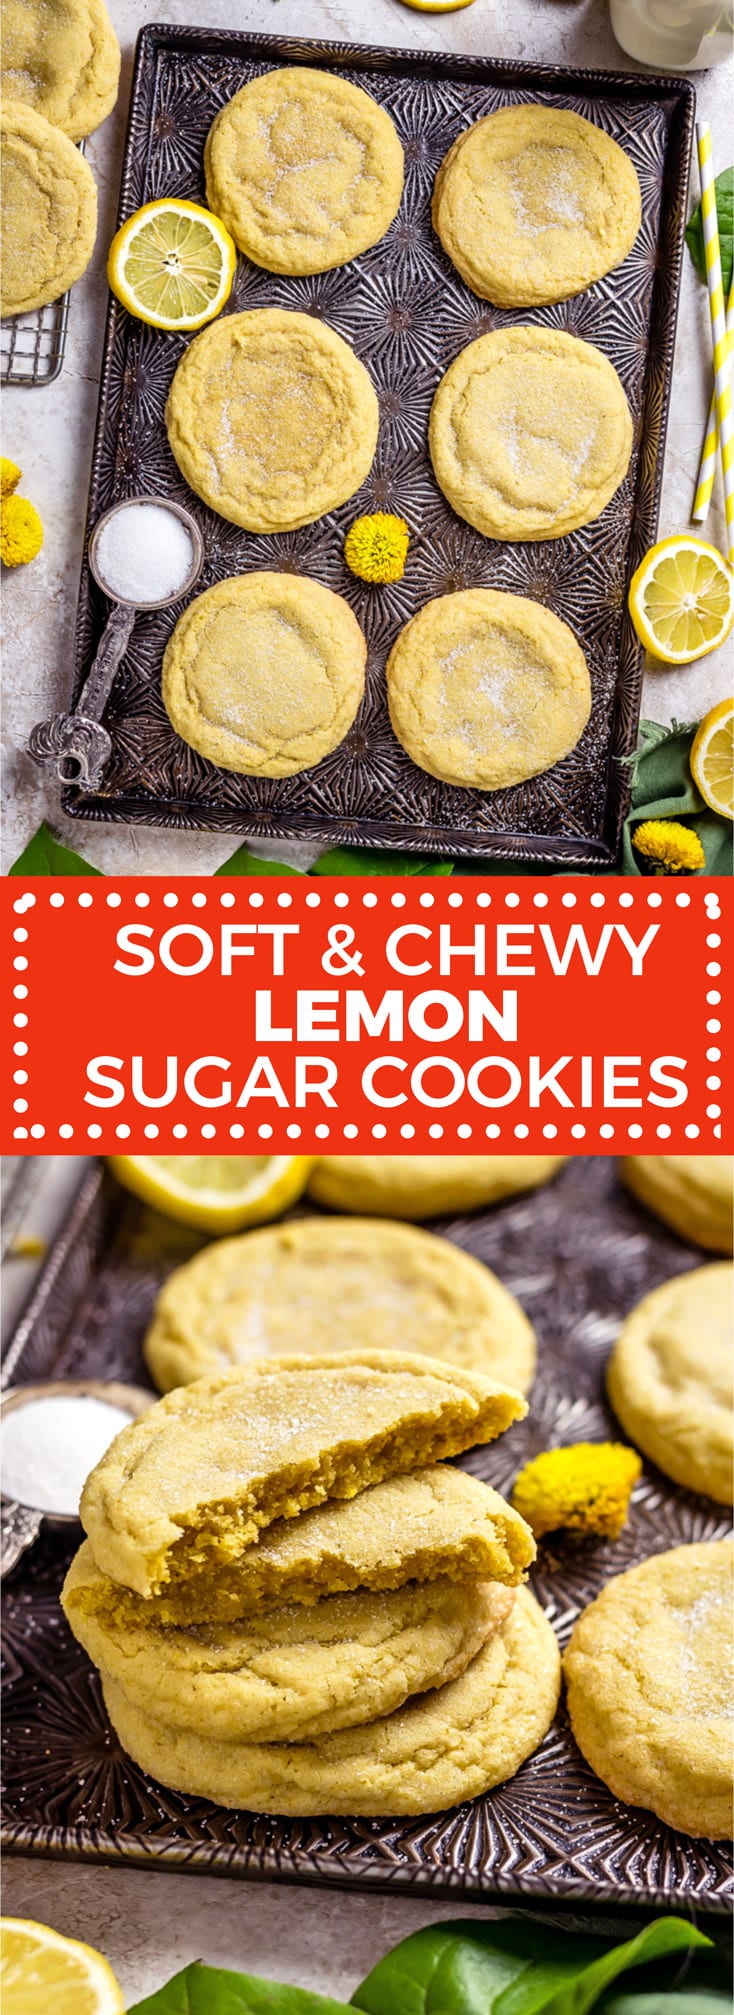 A soft, big, buttery, chewy cookie is the key to my heart, and these Soft and Chewy Lemon Sugar Cookies absolutely fit the bill. They're made from scratch and bursting with tart lemony flavor from both lemon zest and real lemon juice! | hostthetoast.com